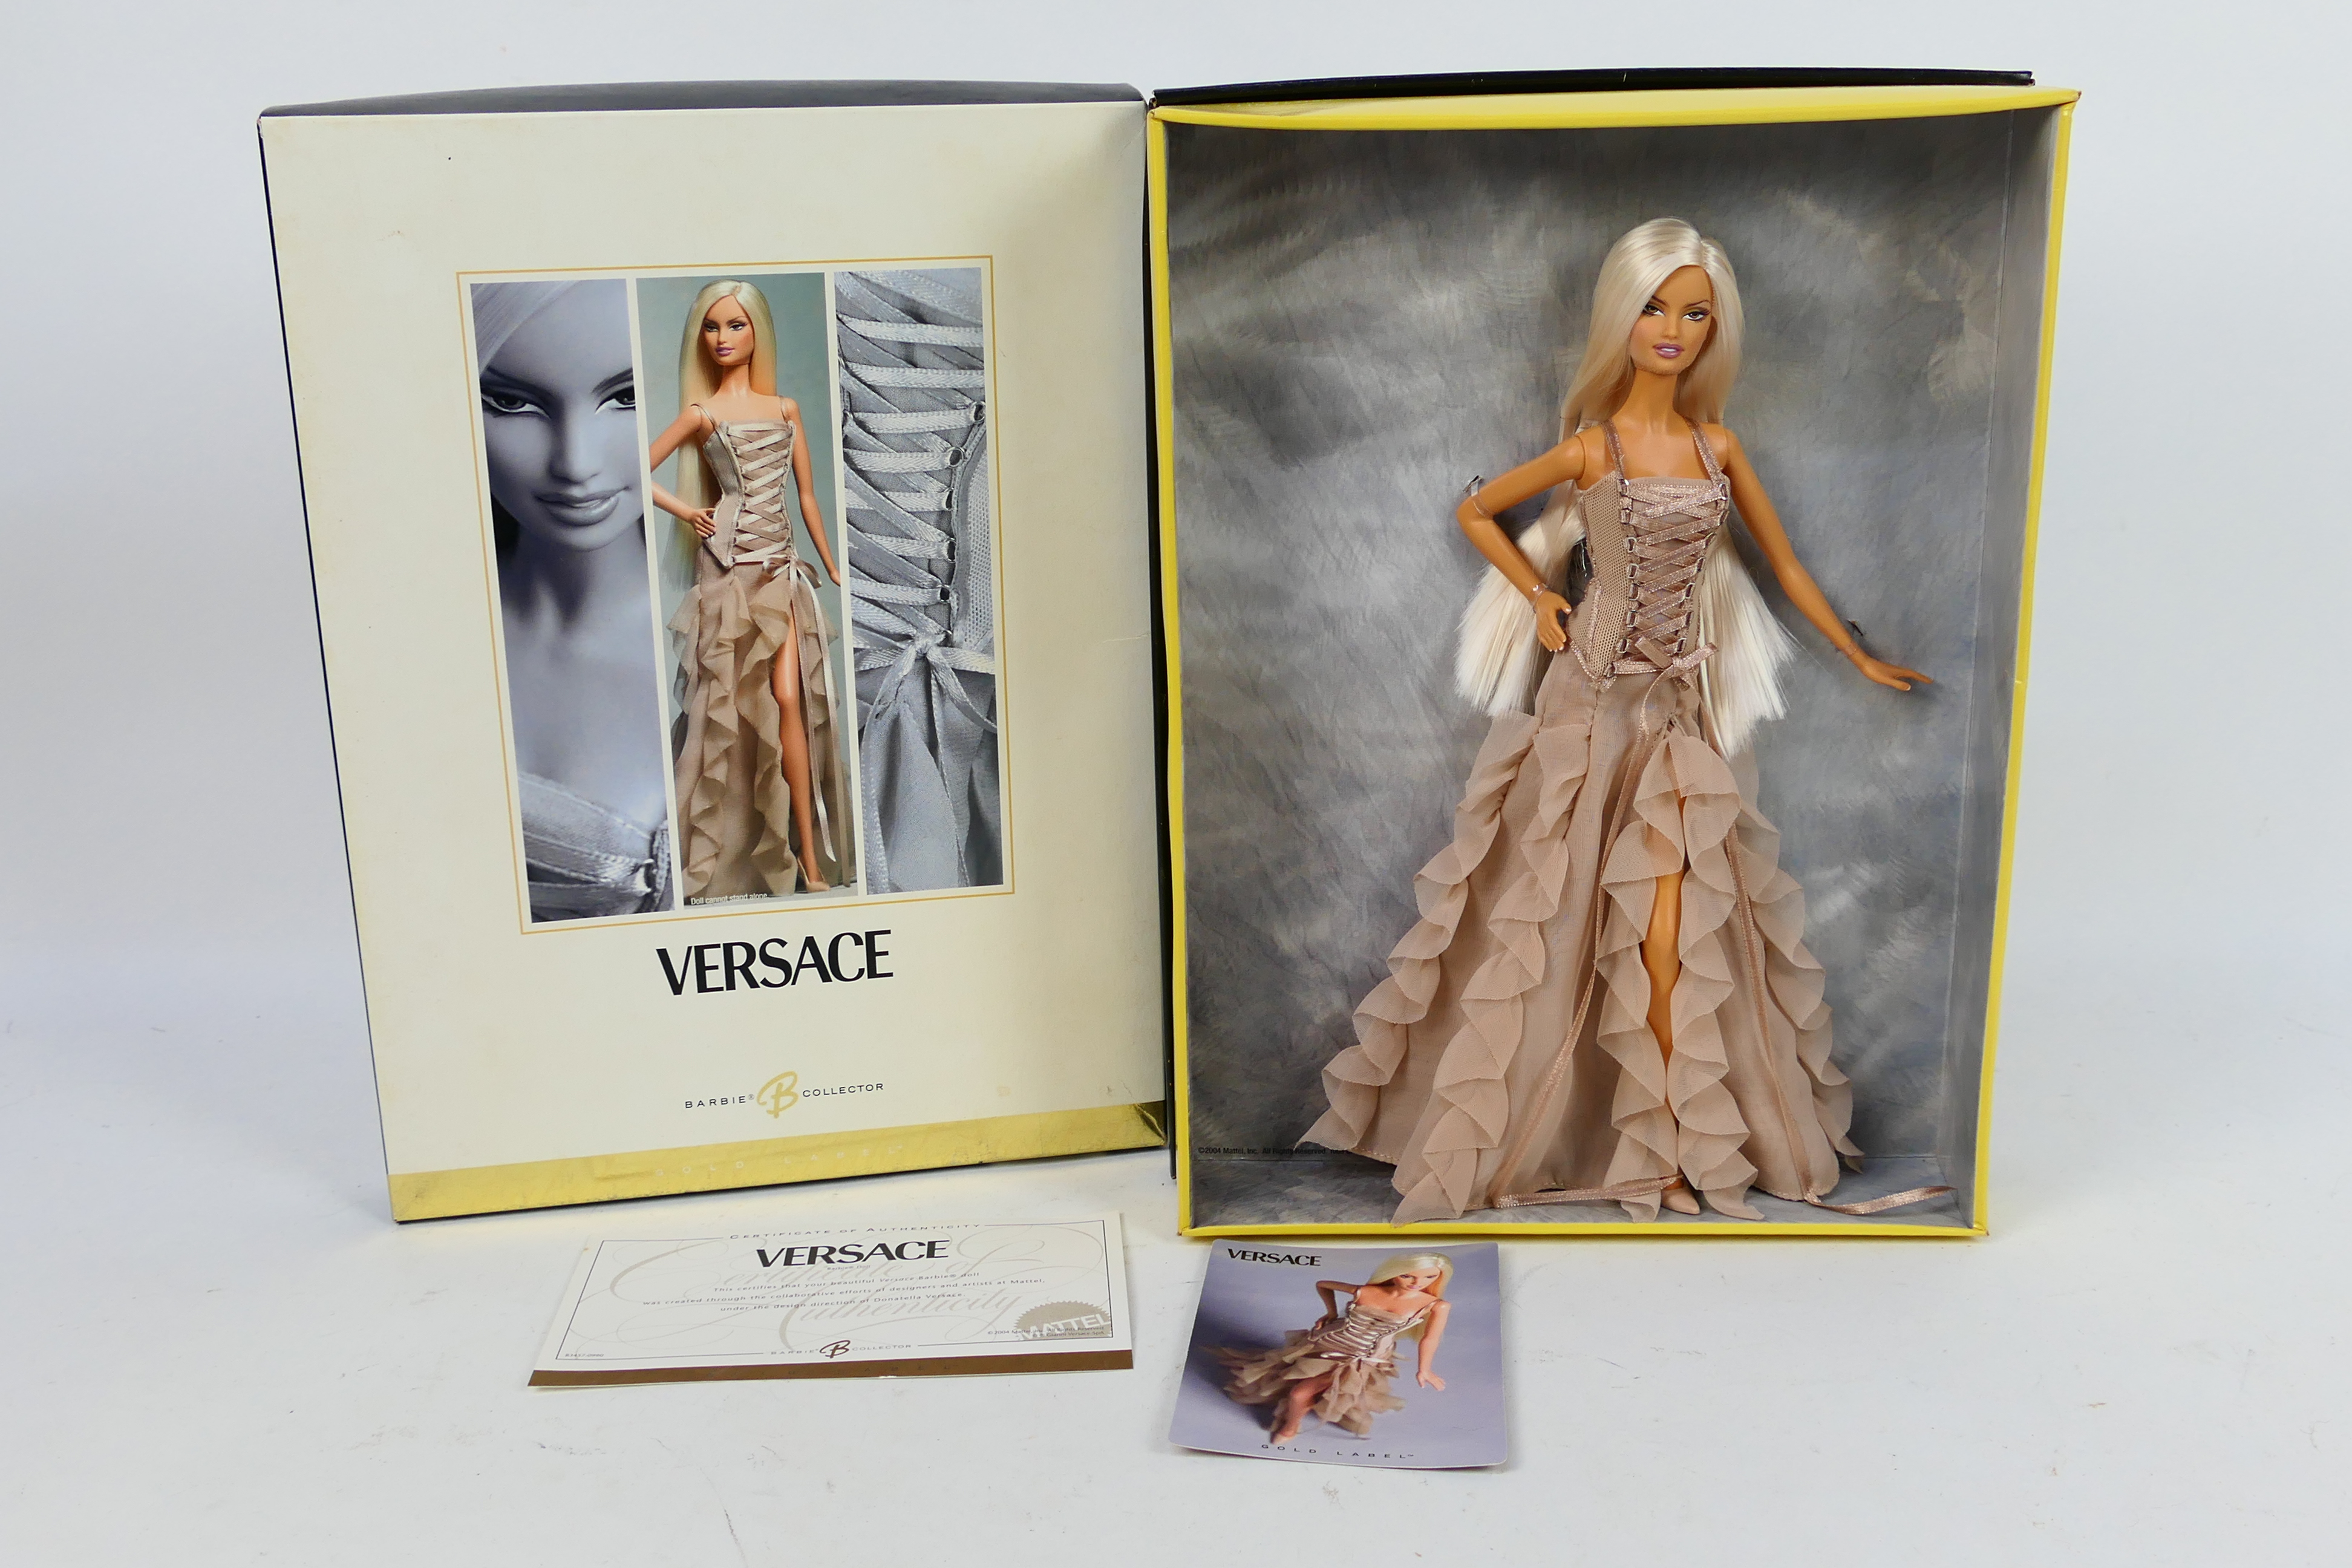 Mattel - Barbie - A limited edition boxed Barbie Versace from 2004 # B3457.